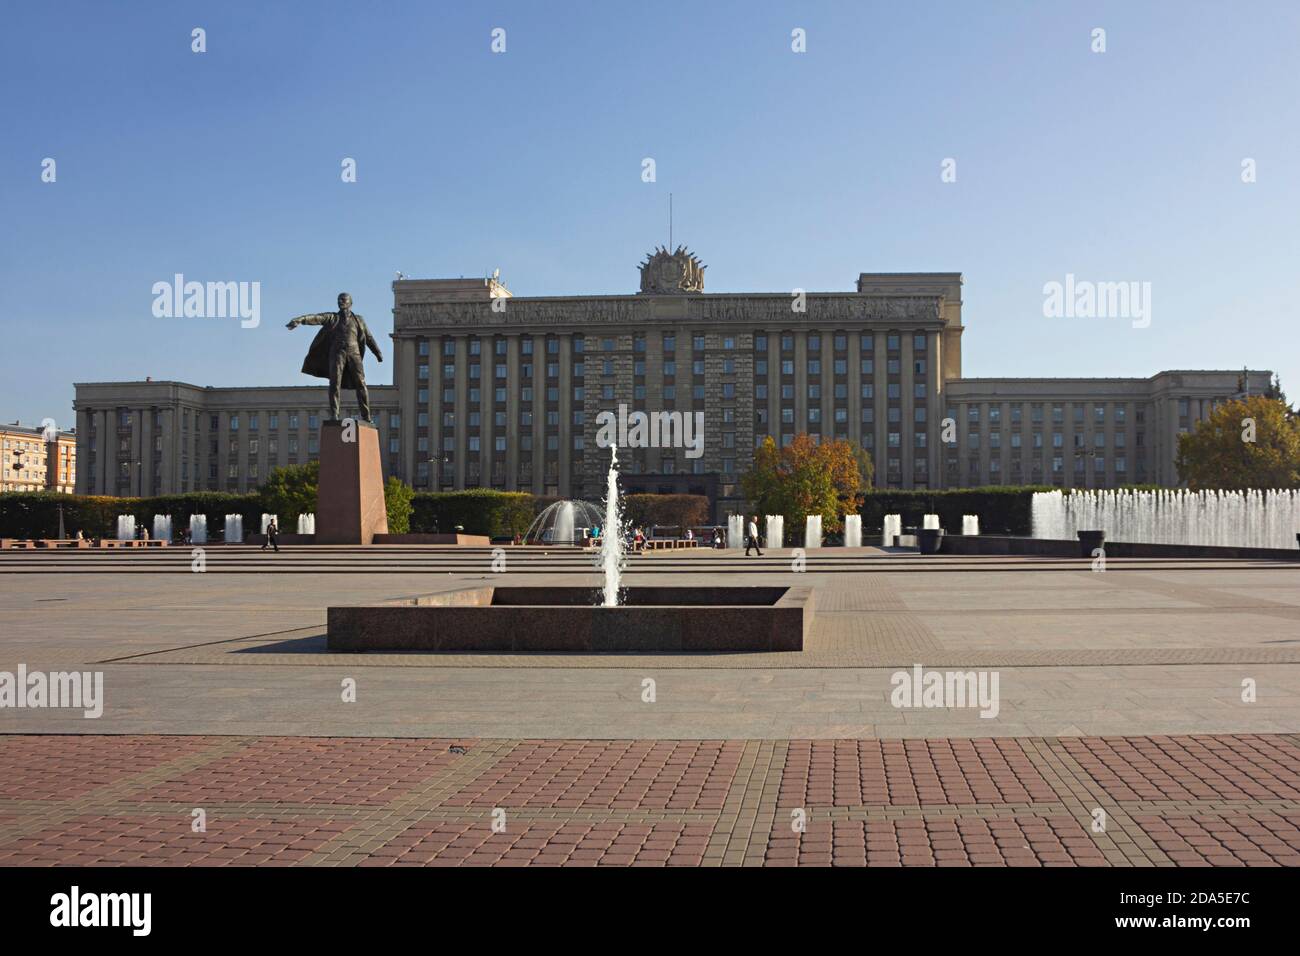 St. Petersburg, Russia, October 02, 2020. The architectural ensemble of Moskovskaya Square: The House of Soviets (Stalin empire style), city fountains Stock Photo